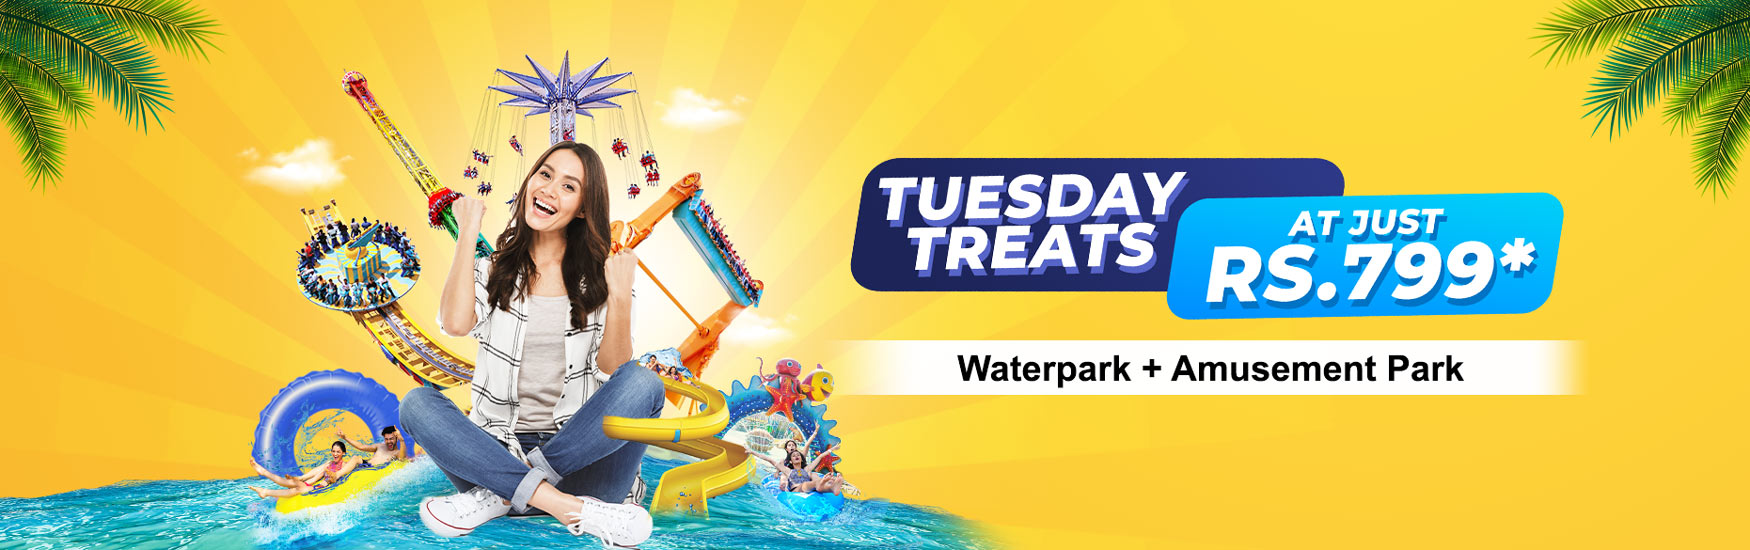 Enjoy both the water park and amusement park for just ₹799 (taxes extra) every Tuesday.